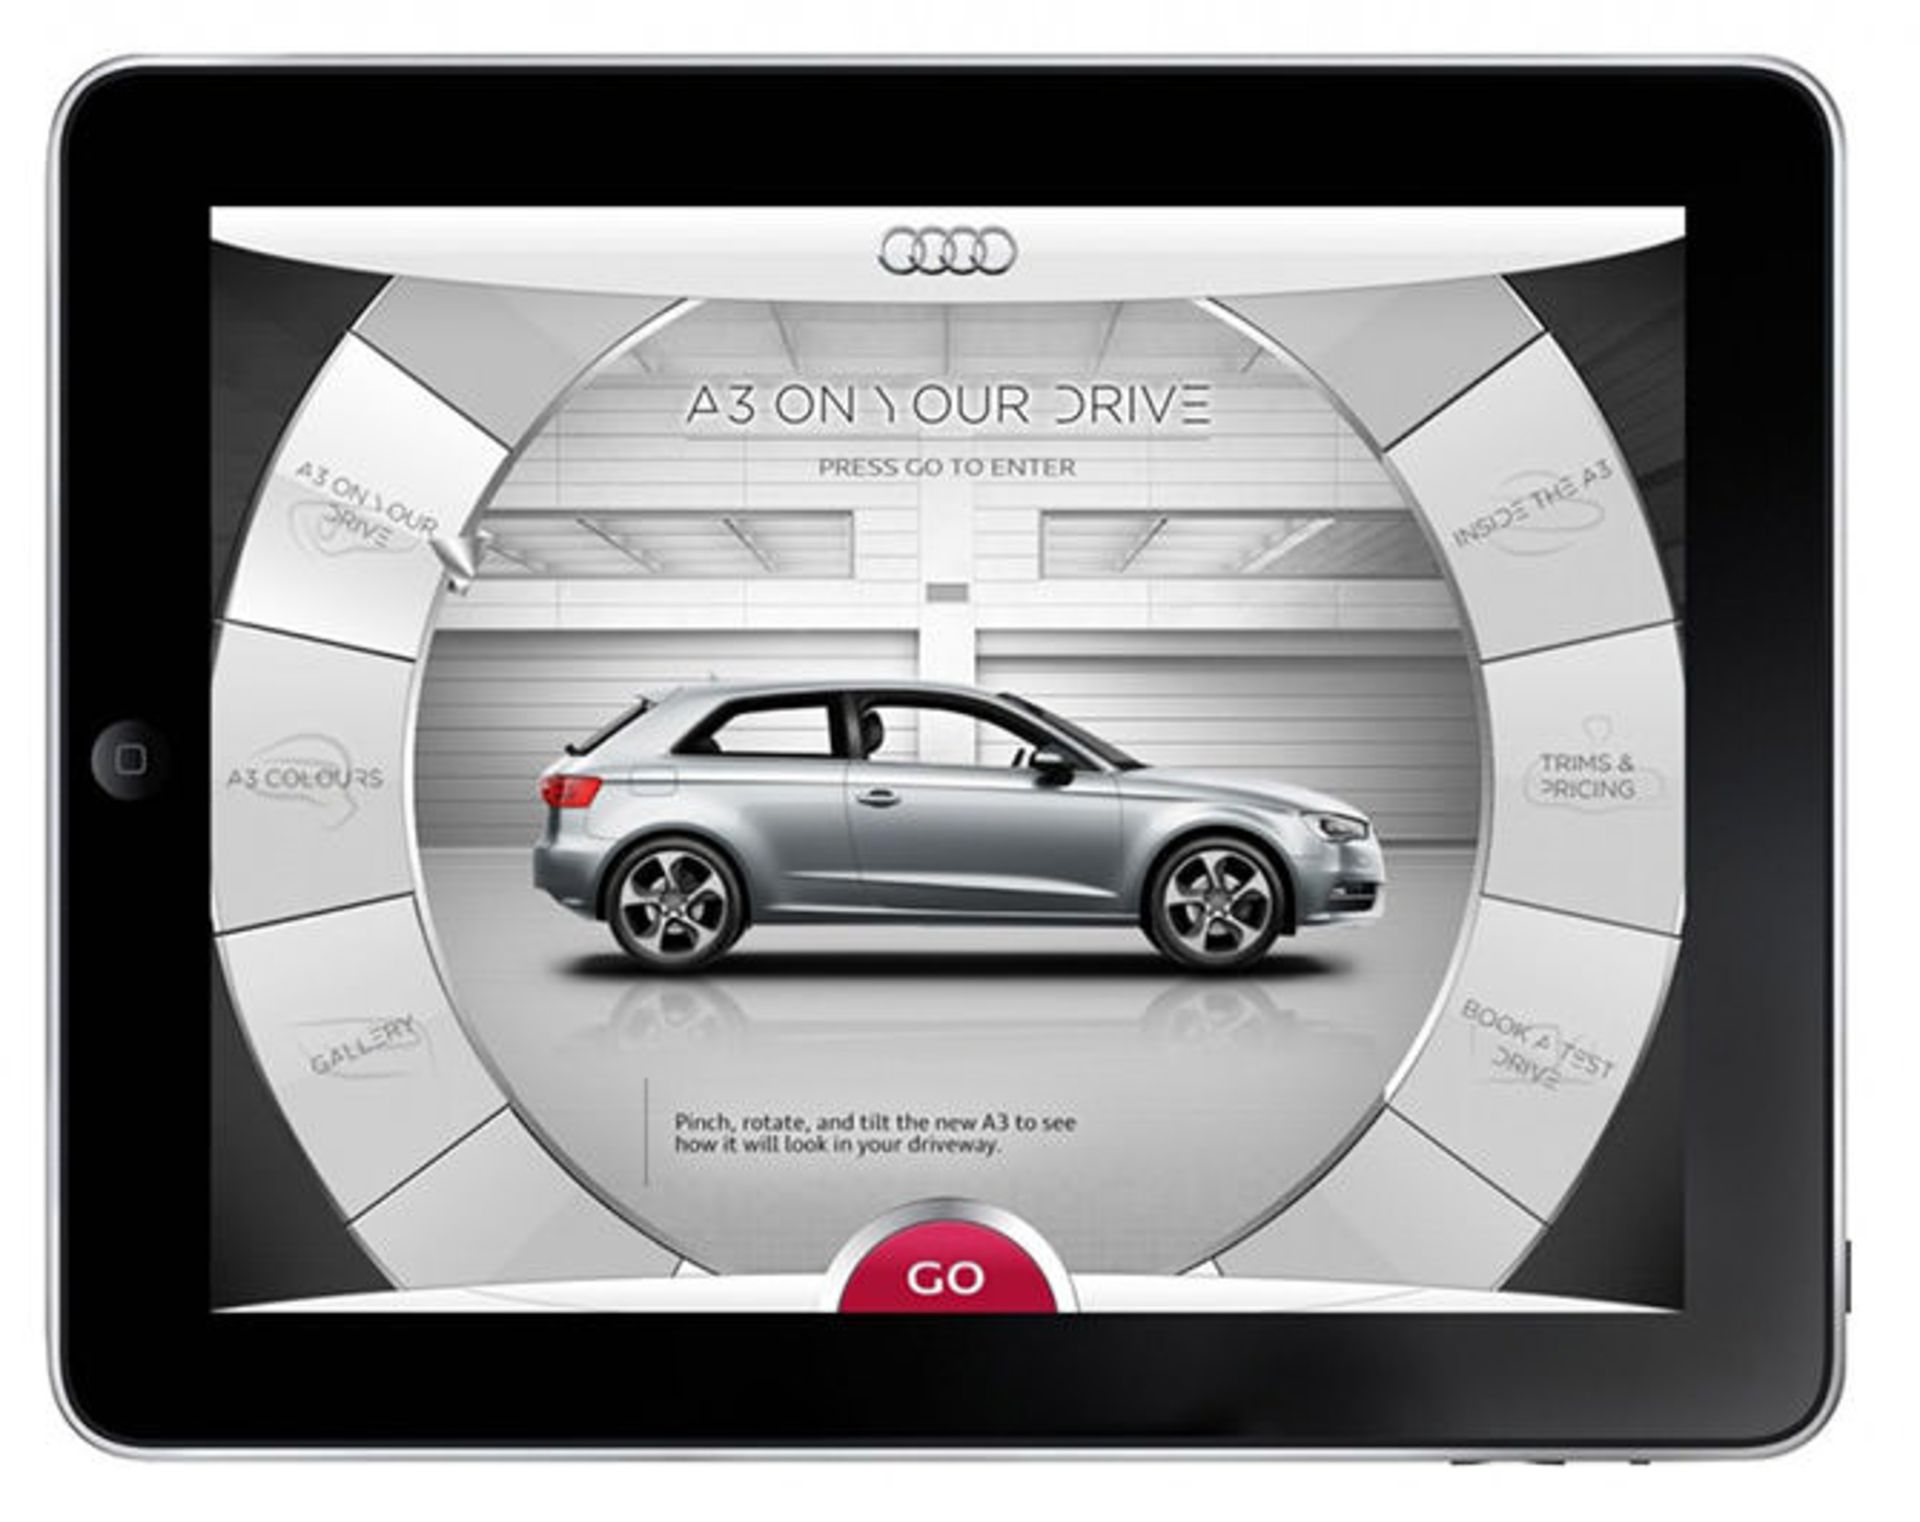 Audi-A3-Homepage-resized-1024x811